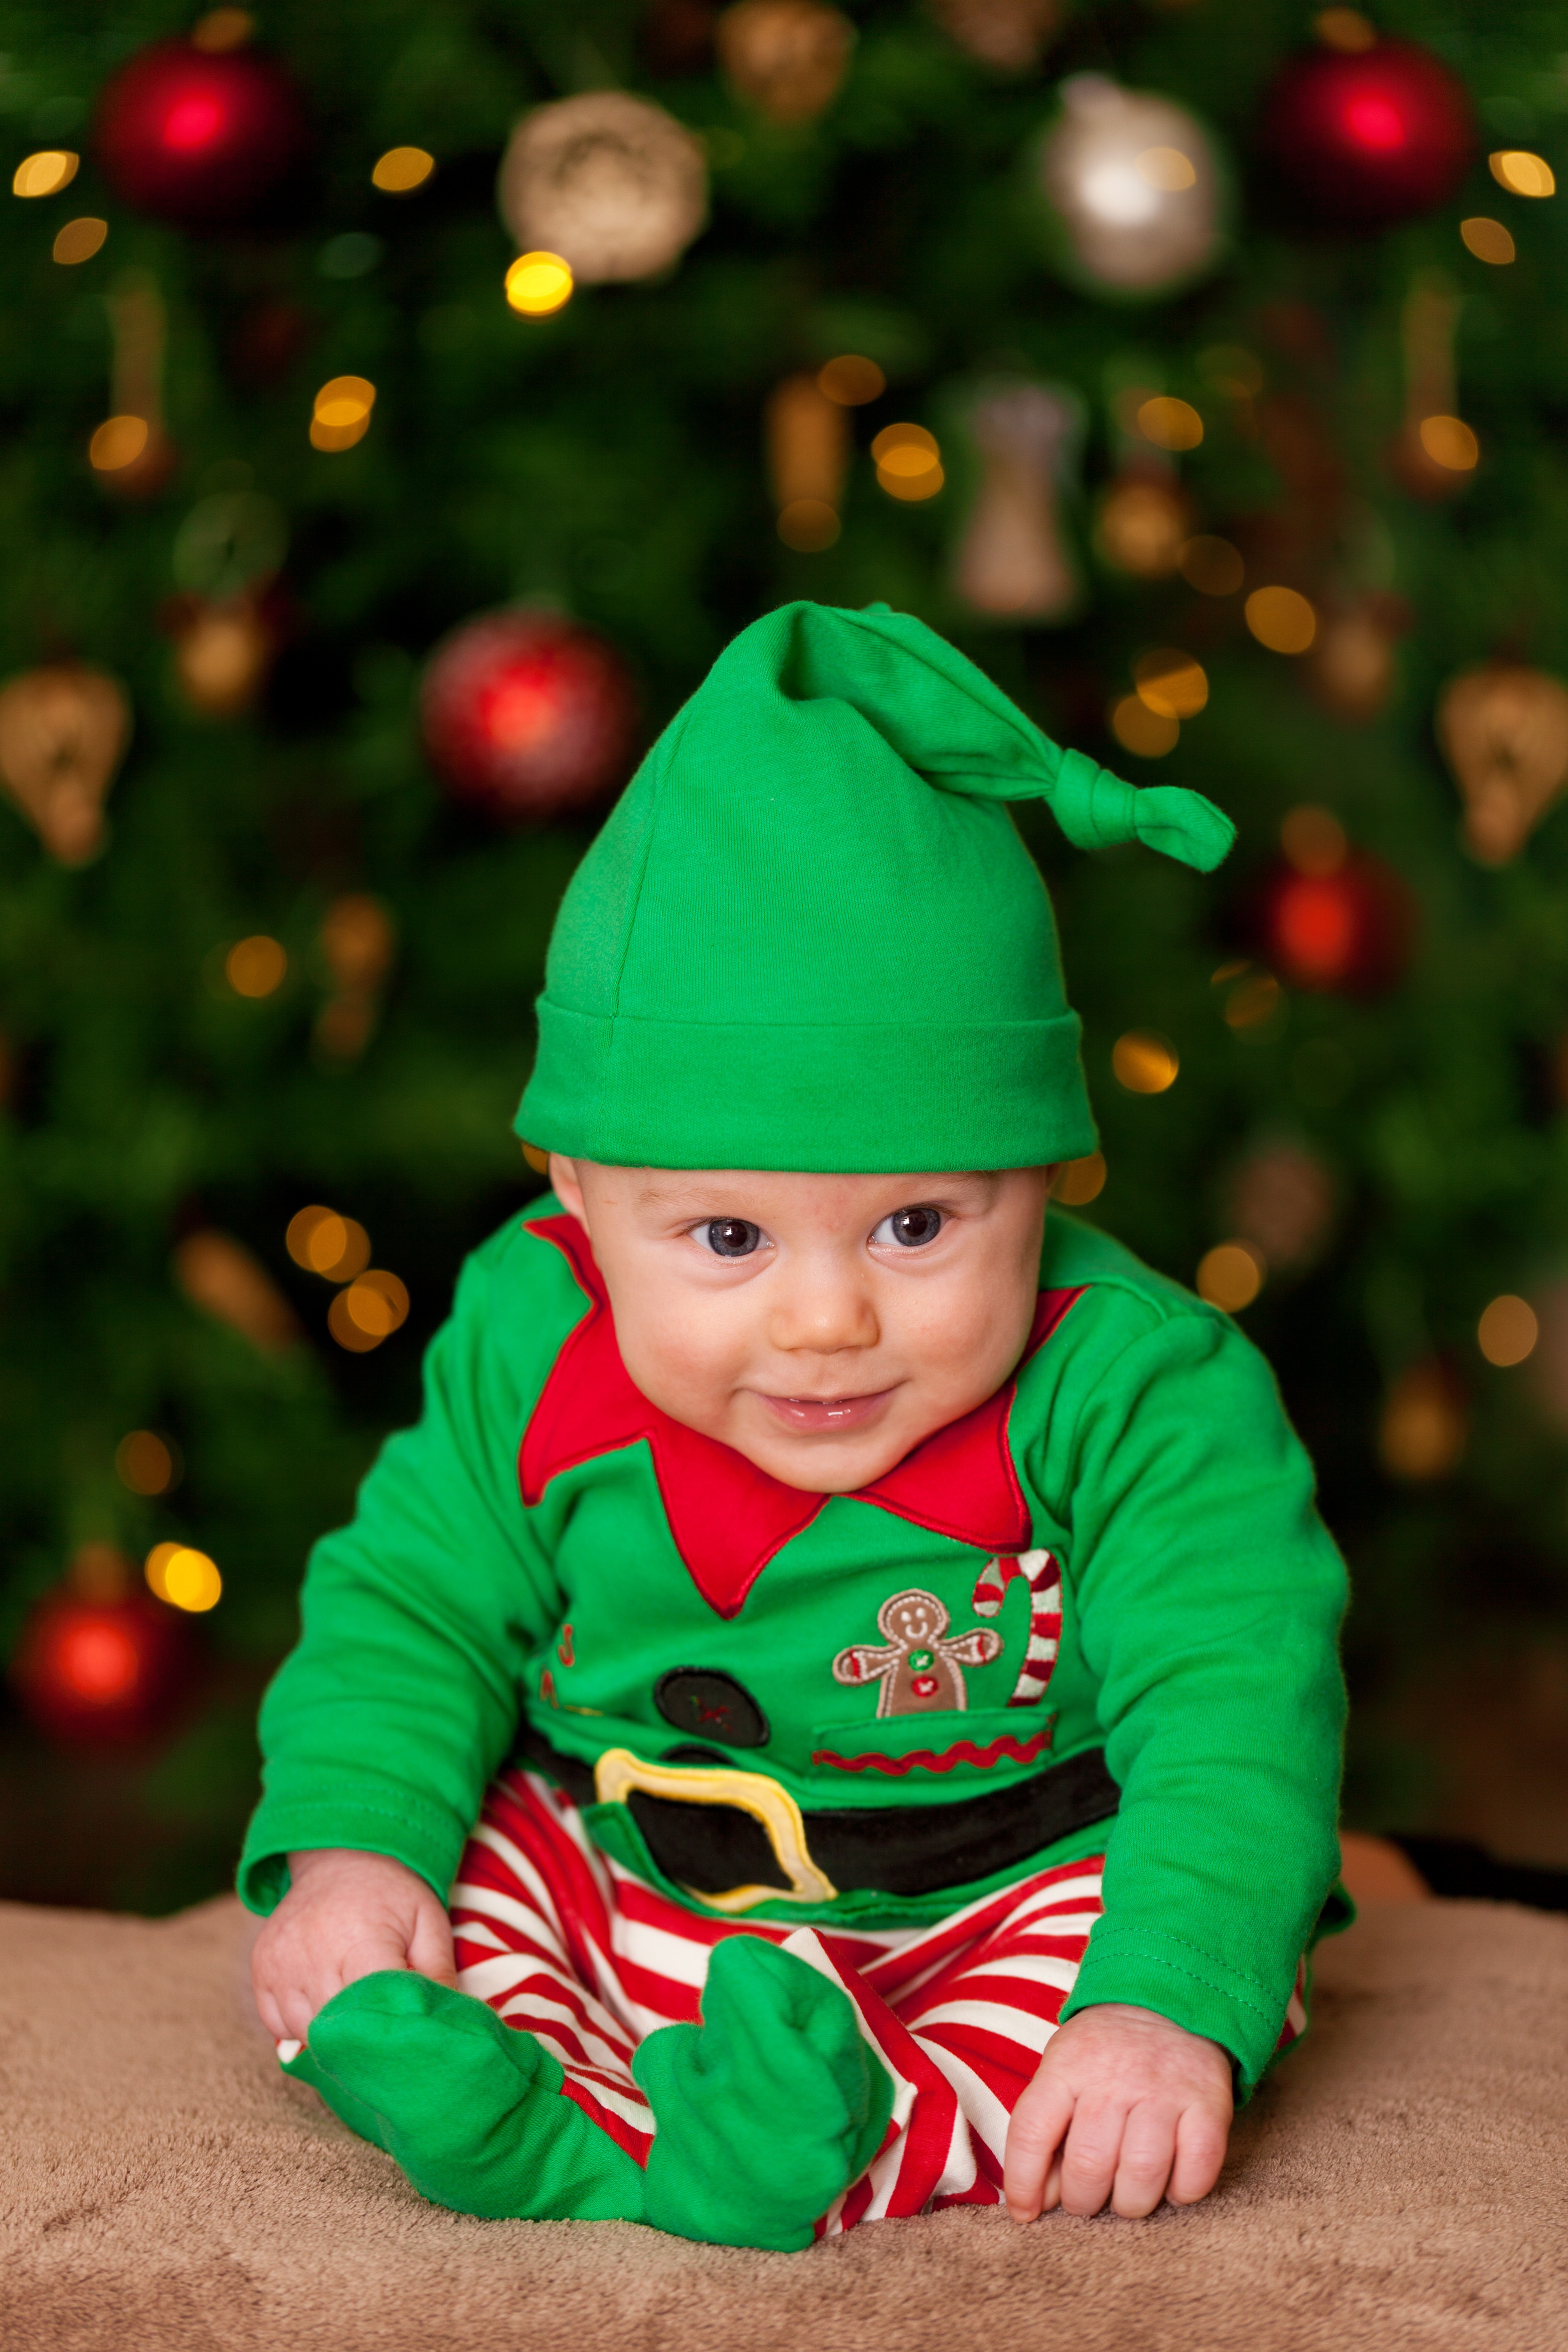 Baby in green dress photo